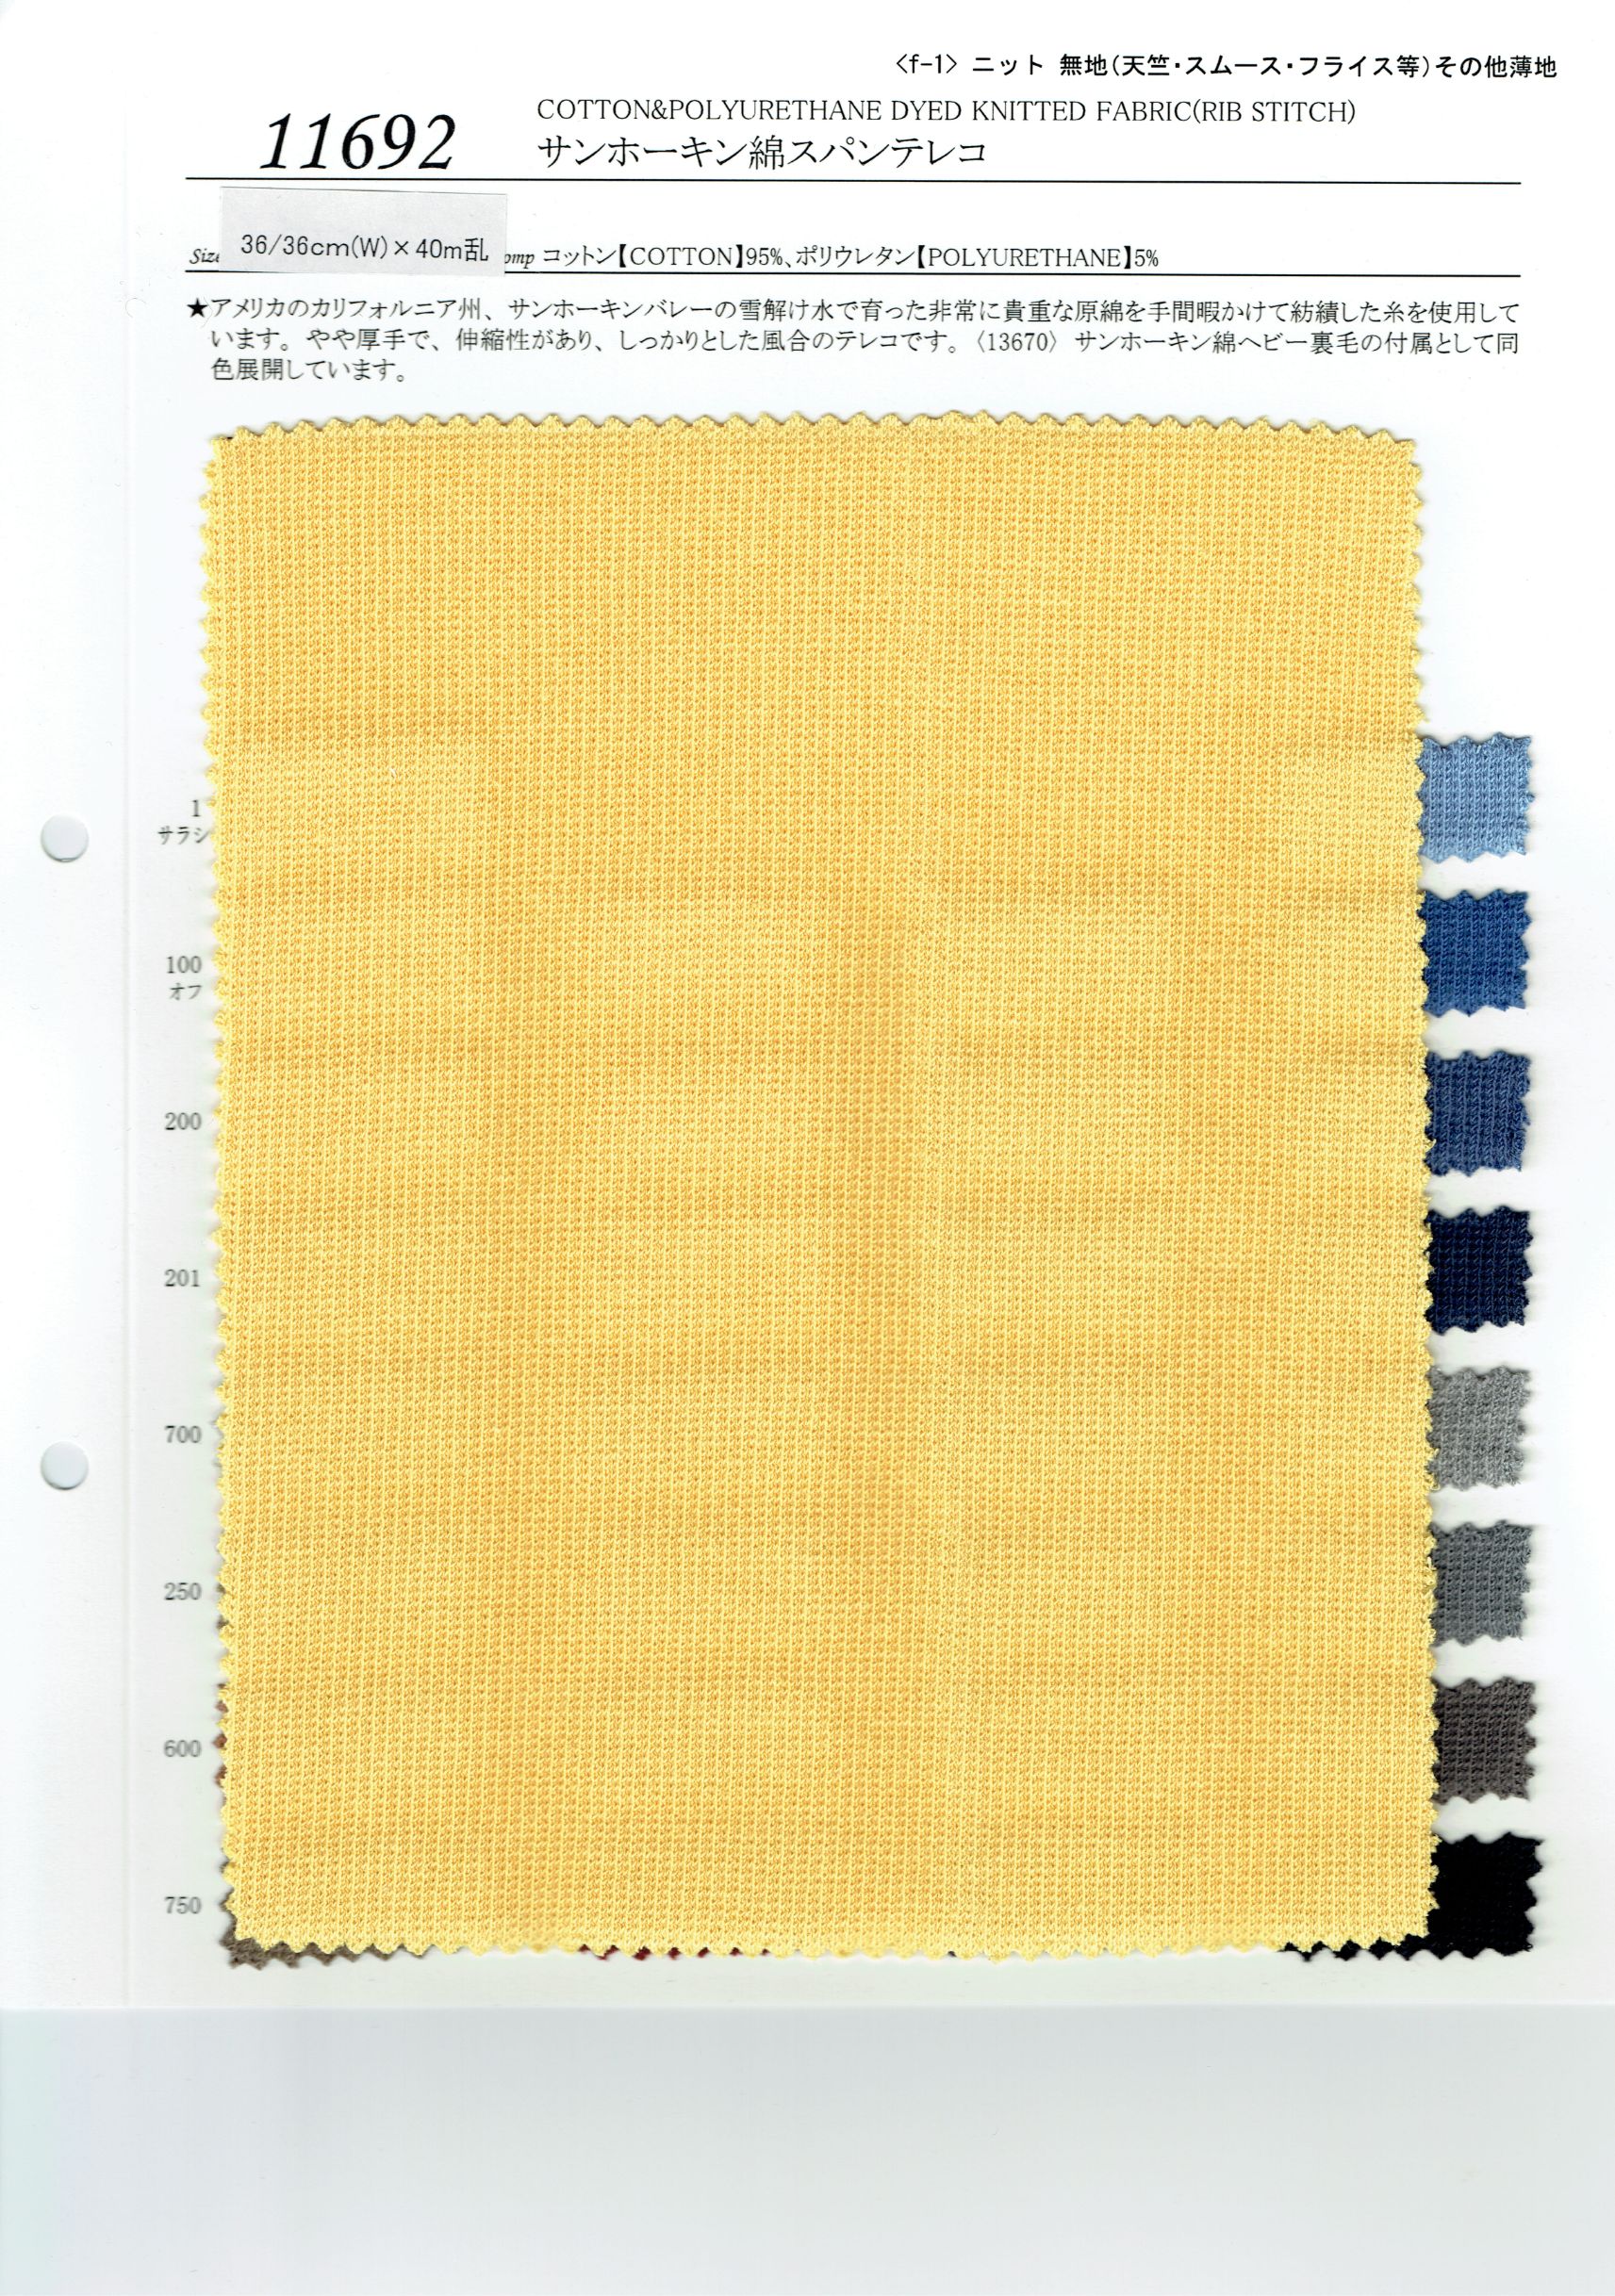 View COTTON95/POLYURETHANE5 DYED KNITTED FABRIC[RIB STITCH] DYED KNITTED FABRIC[RIB STITCH]